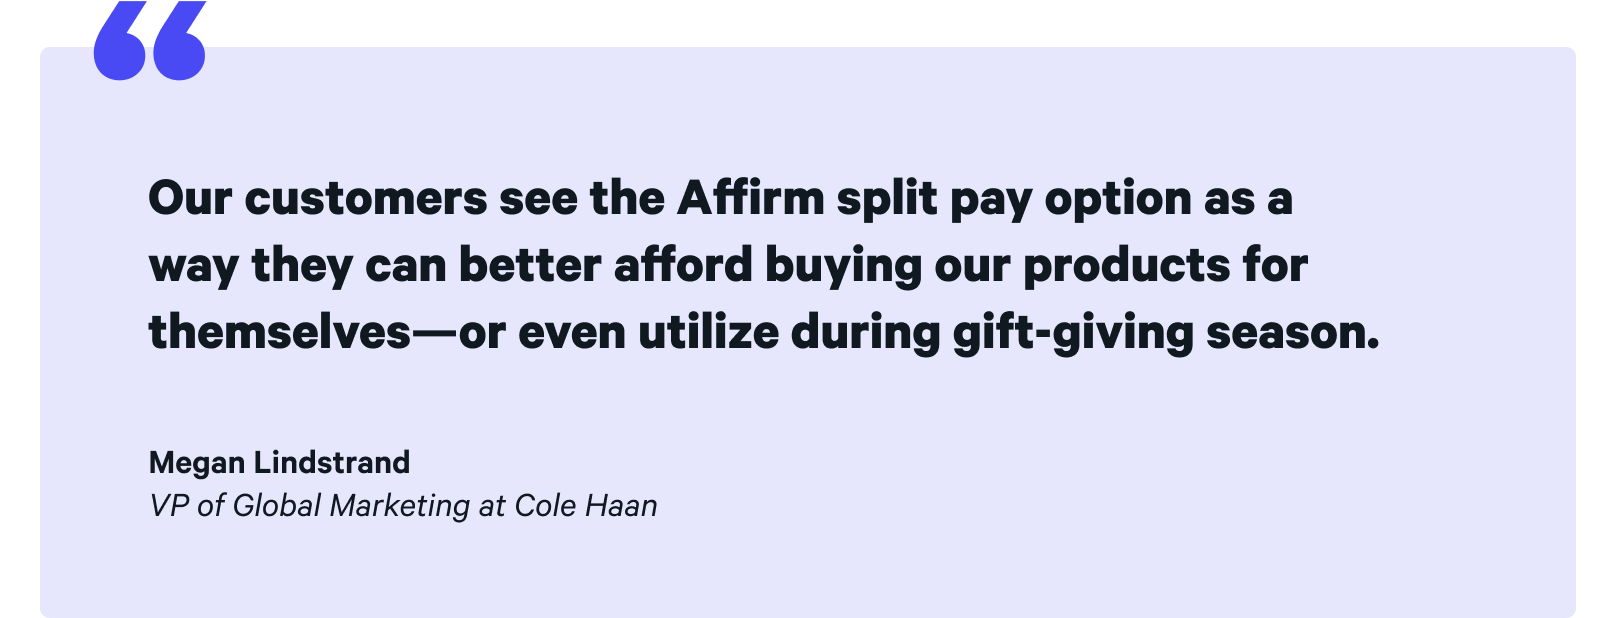 Cole Haan case study quote